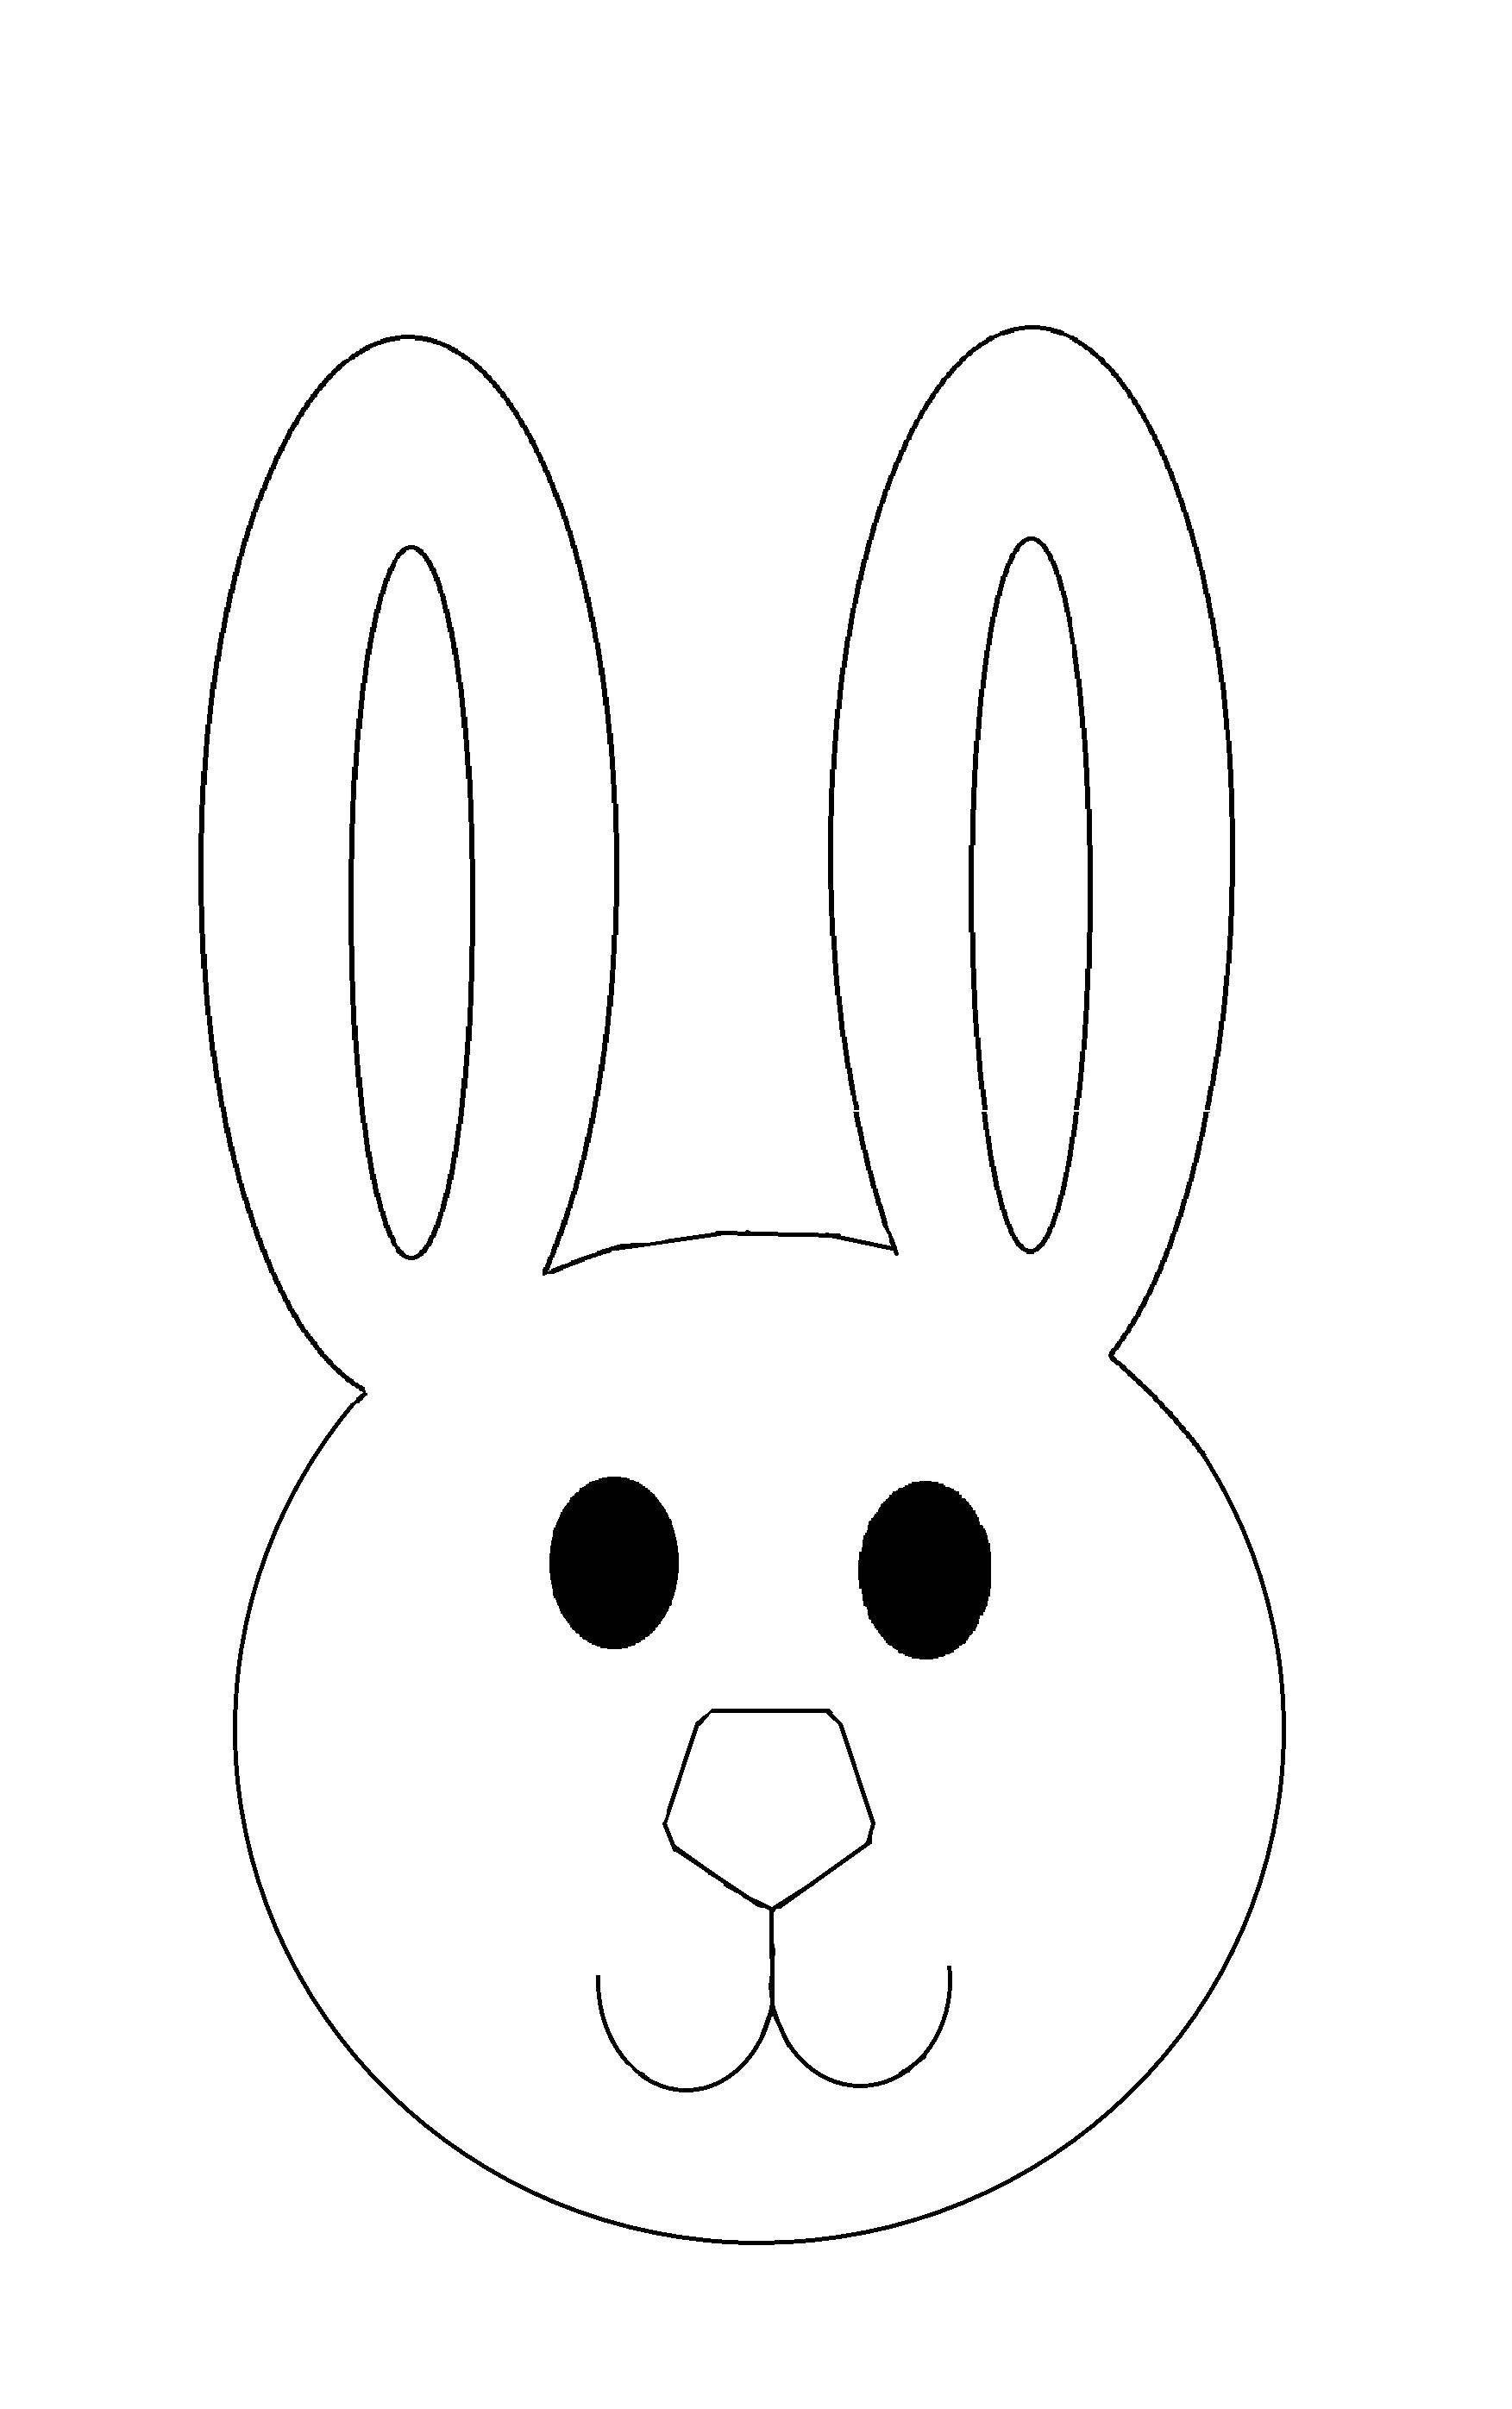 Coloring Head outline rabbit. Category The contour of the hare to cut. Tags:  outline , colic, head, ears.